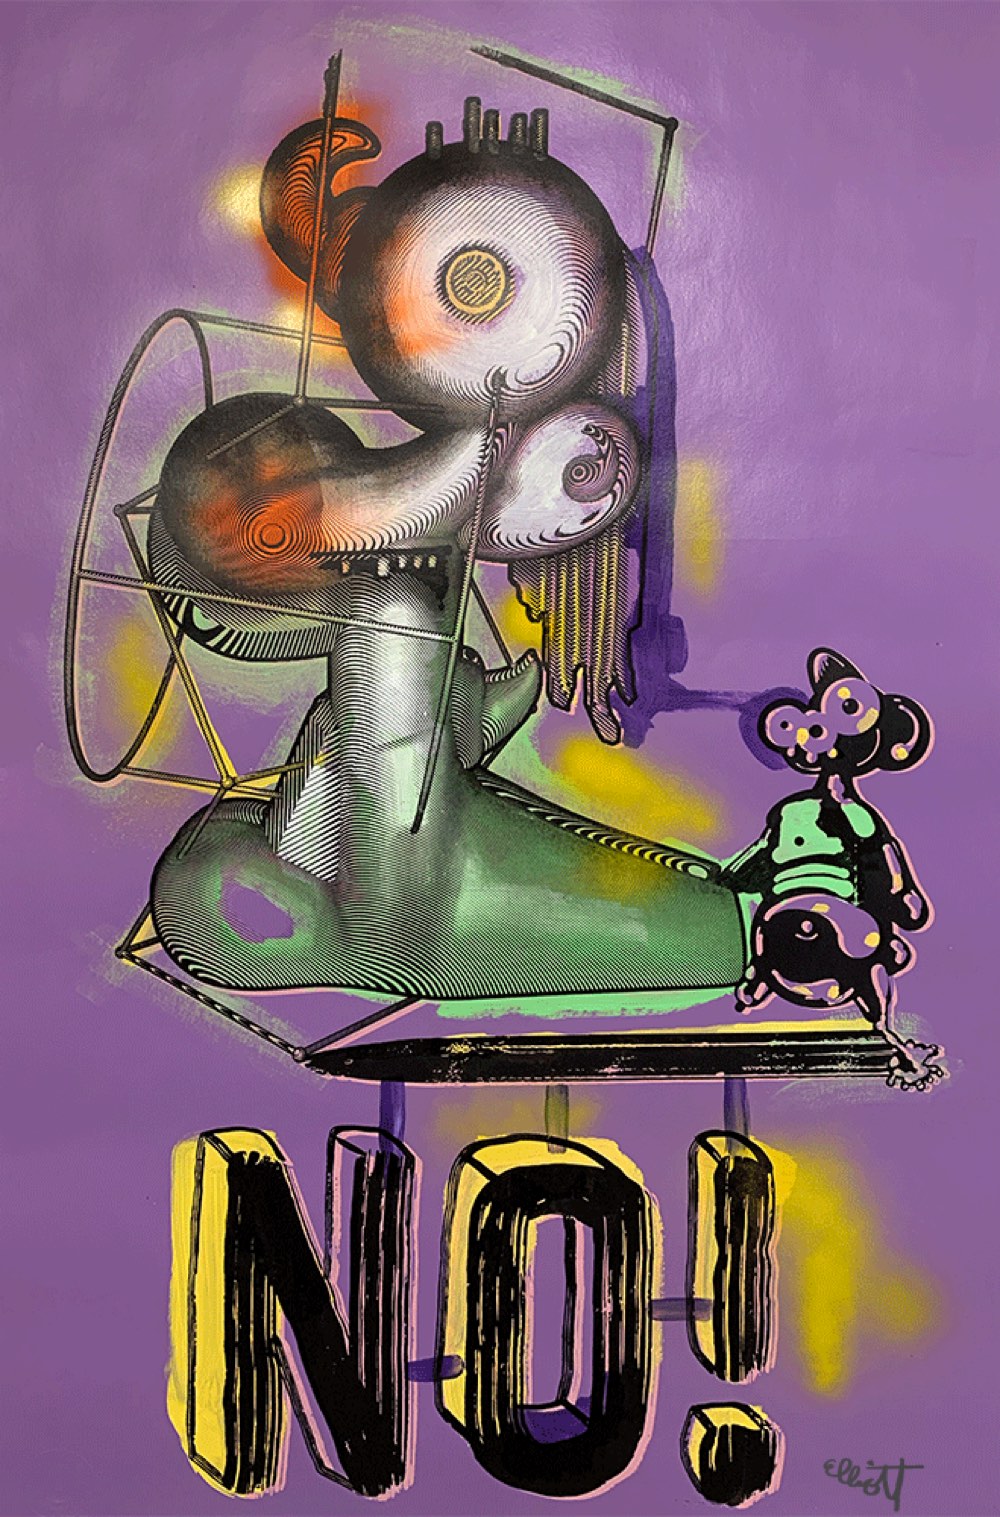 "No! #1"
By Elliott Earls
Number 1 in an Edition of 5
Acrylic, Silkscreen Ink and Spraypaint
29 x 40″
Hand Painted. (each print in the edition is unique)
Archival Heavyweight 250gsm Coventry Rag 100% Cotton Paper with a Straight Edge
Signed, Numbered and Blind Embossed with the Cranbrook Seal
Released July 3, 2019